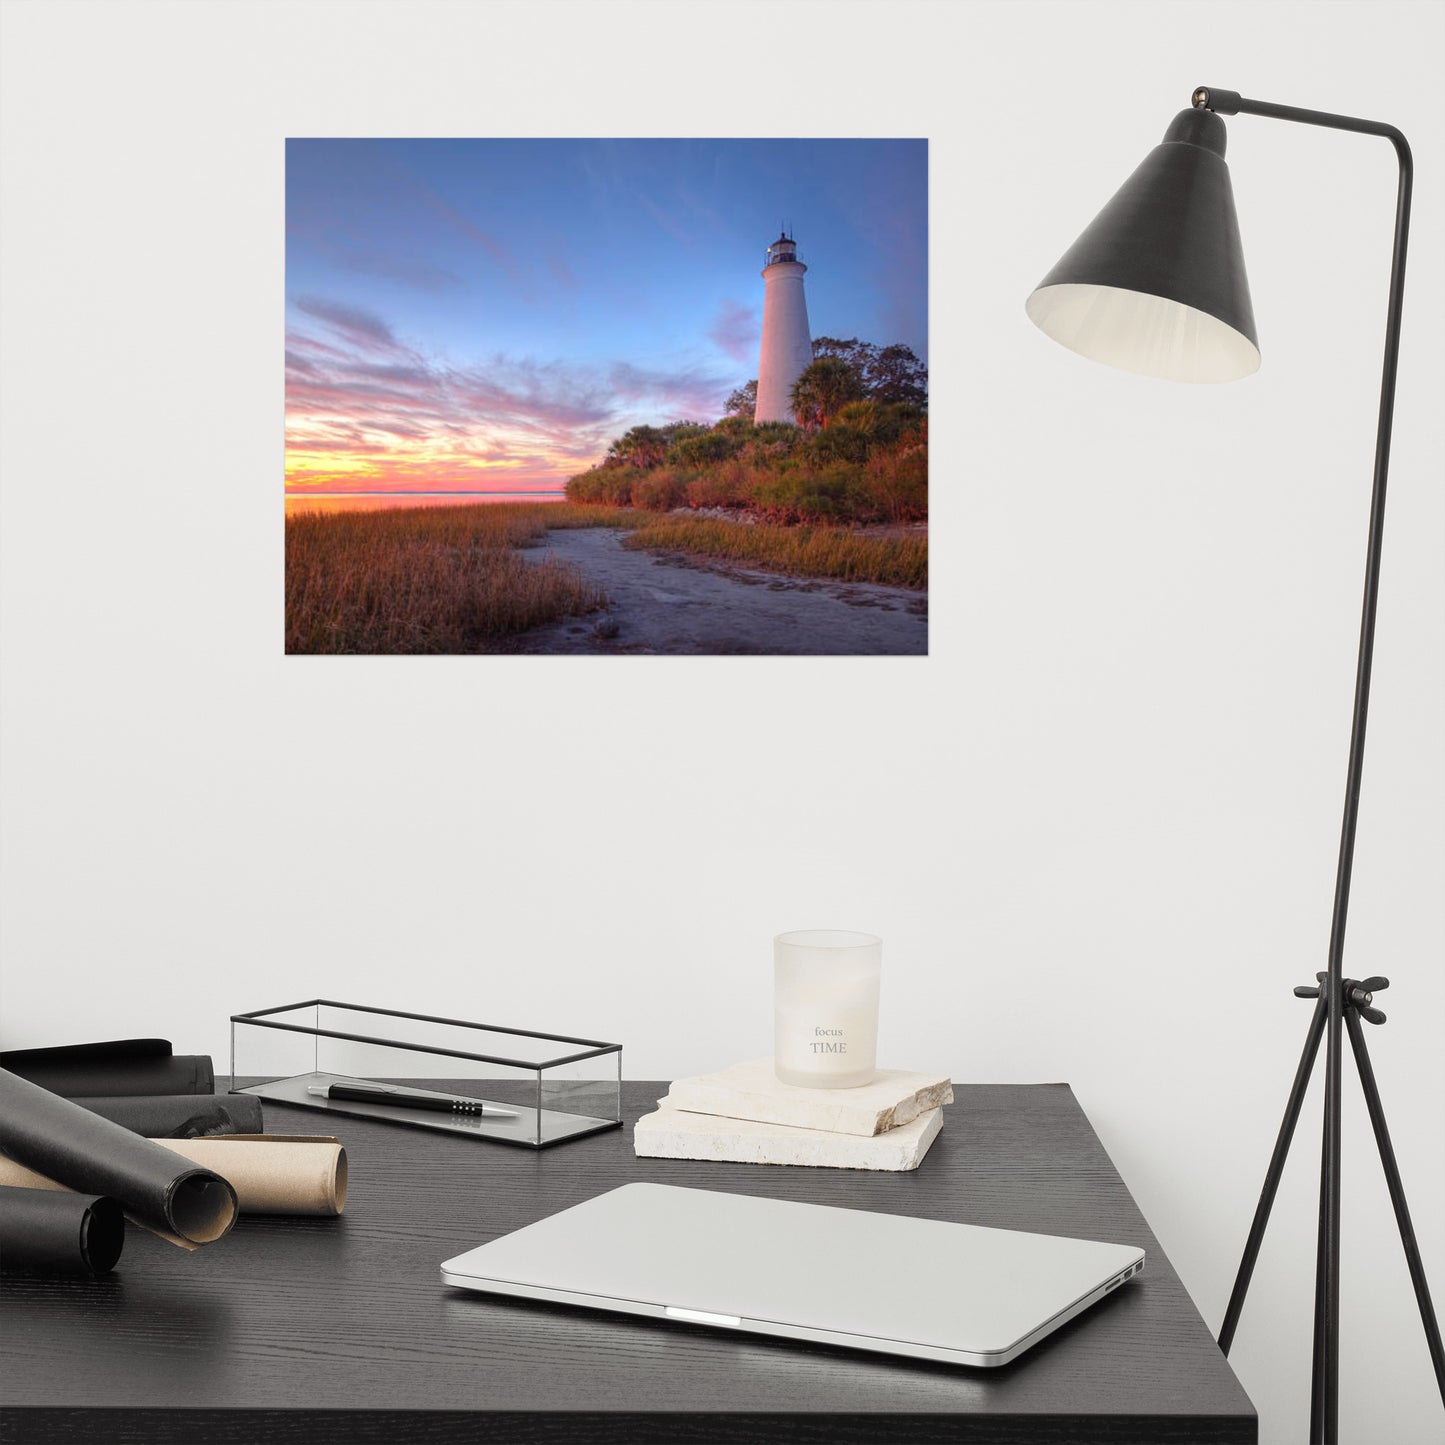 St. Marks Majesty A Beacon of Tranquility Lighthouse Architectural Coastal Beach Photograph Loose Wall Art print